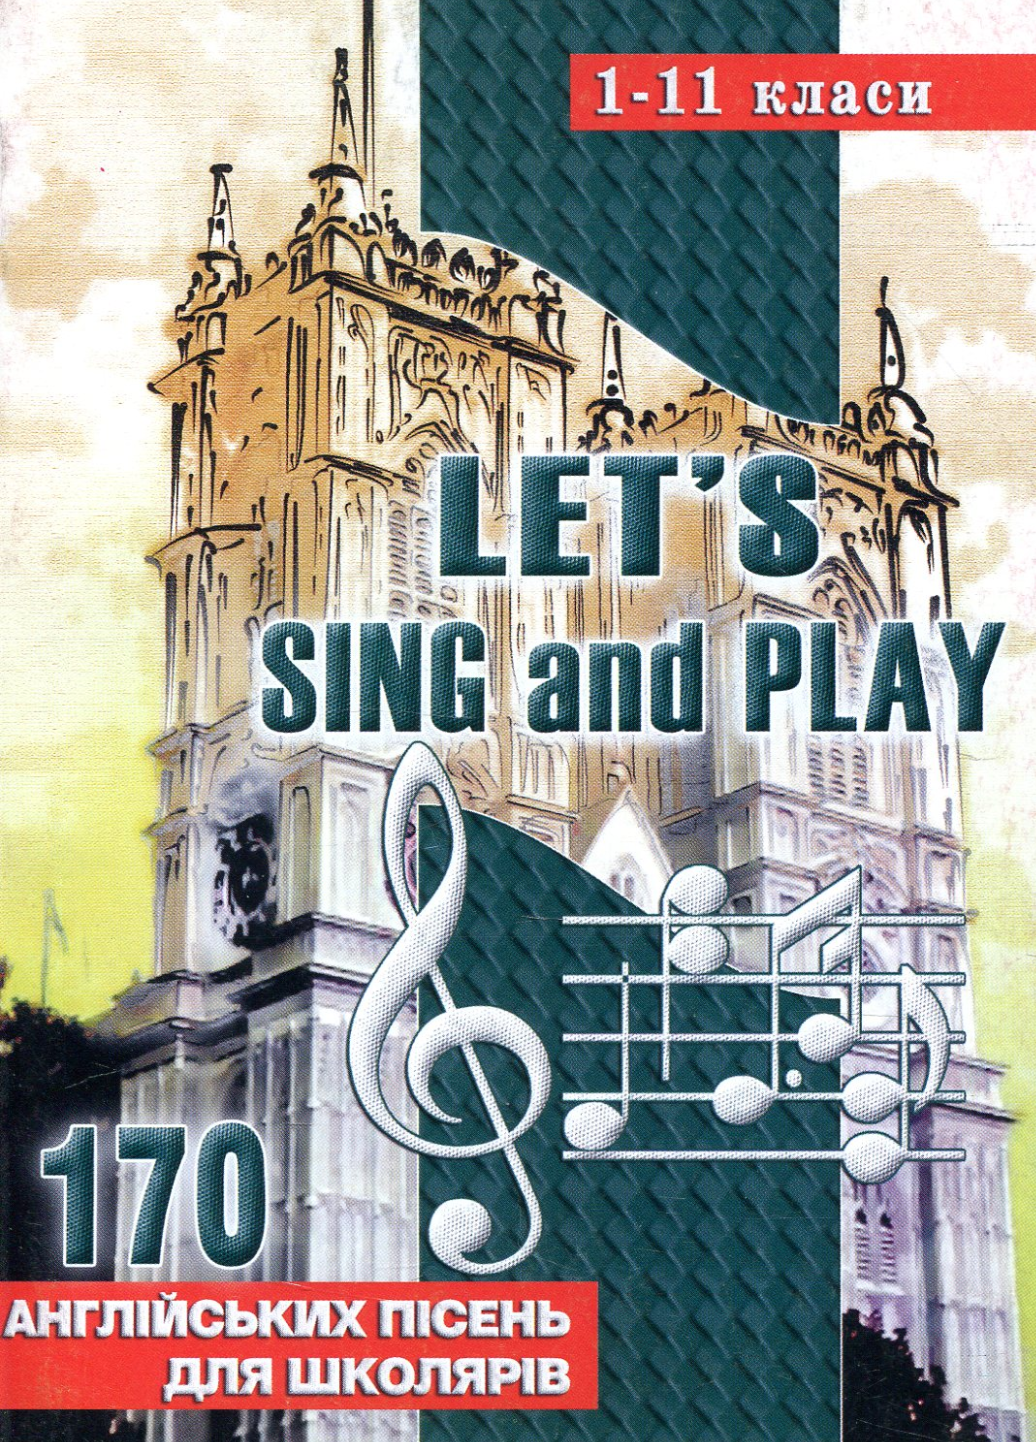 Let’s Sing And Play: 170 английских песен. 1-11 классы. 978-966-634-283-9